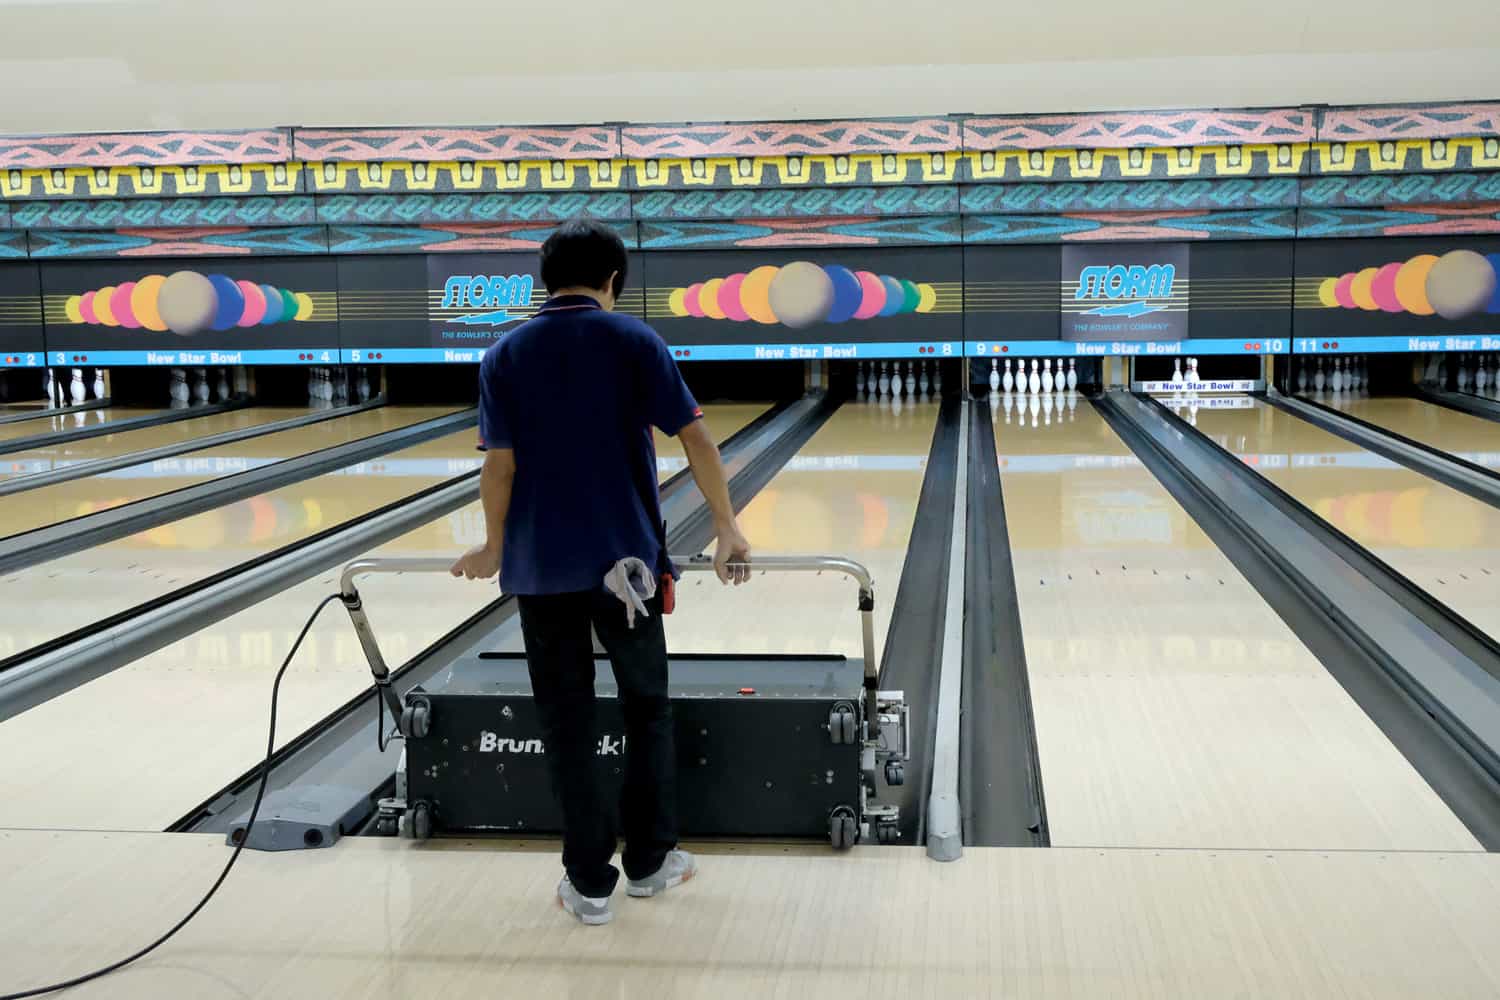 Maintenance and maintenance of the bowling lanes with automatic machines by skilled technicians.